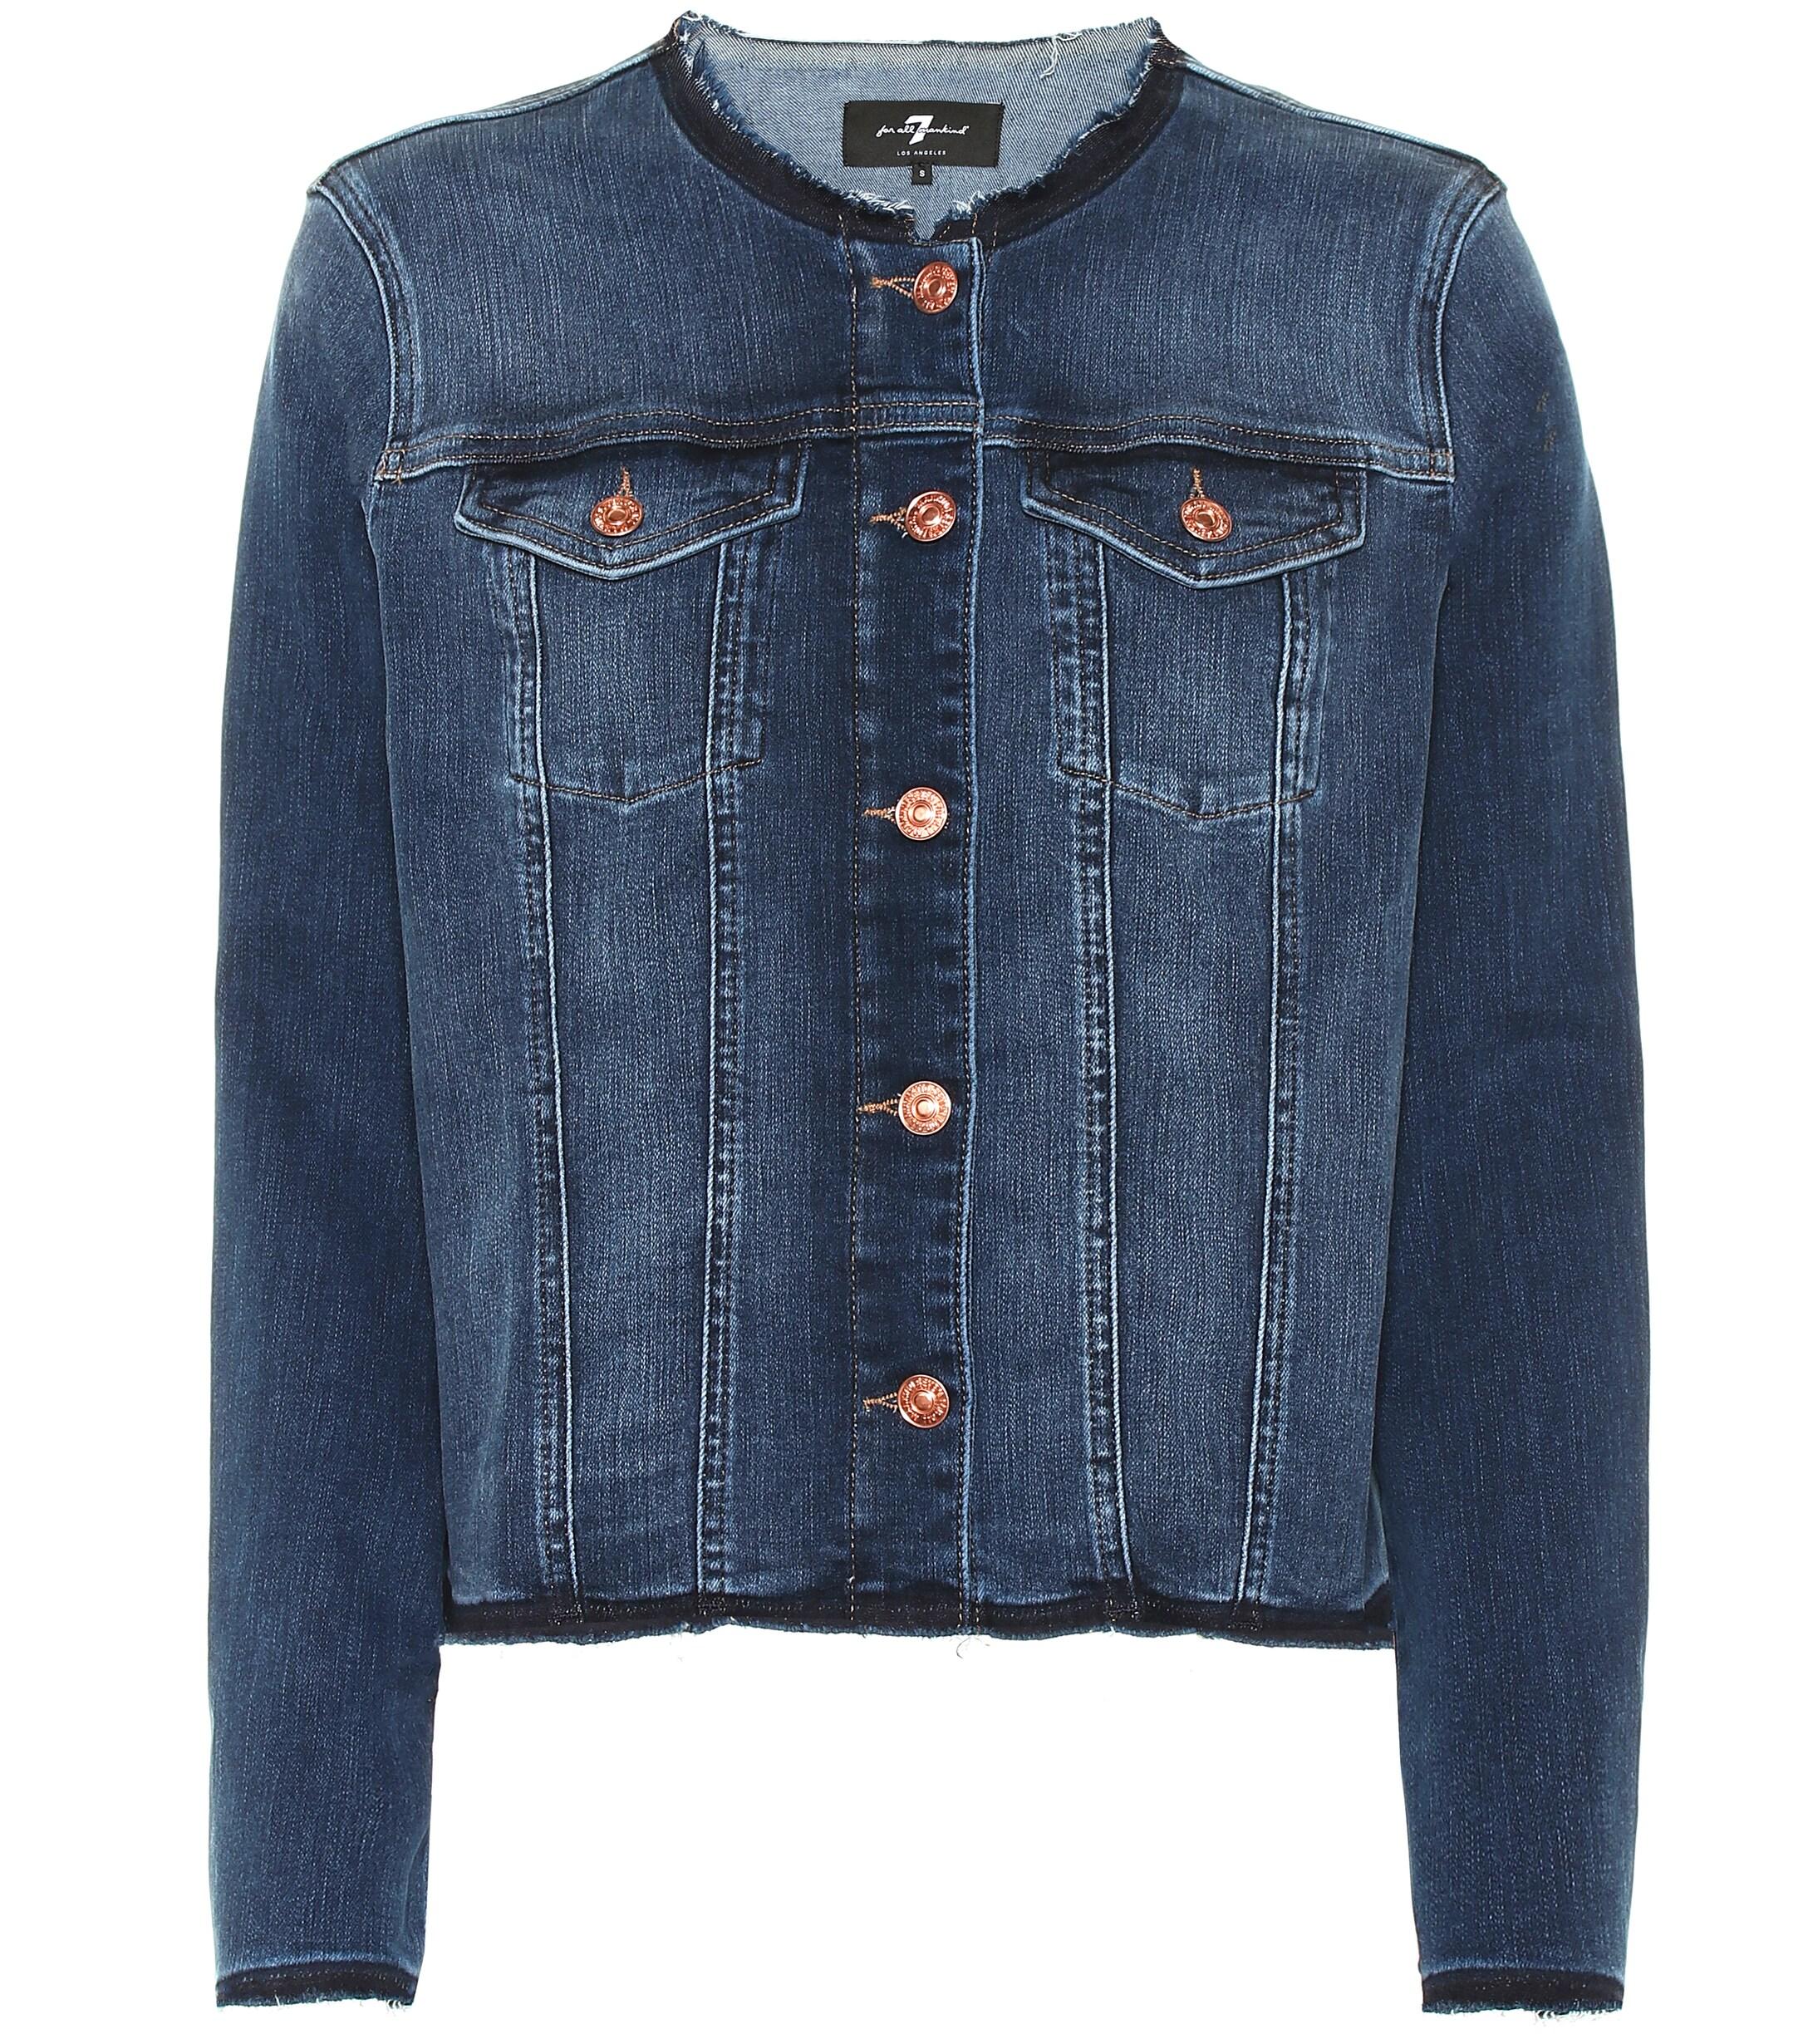 7 For All Mankind Denim Jacket in Blue - Lyst